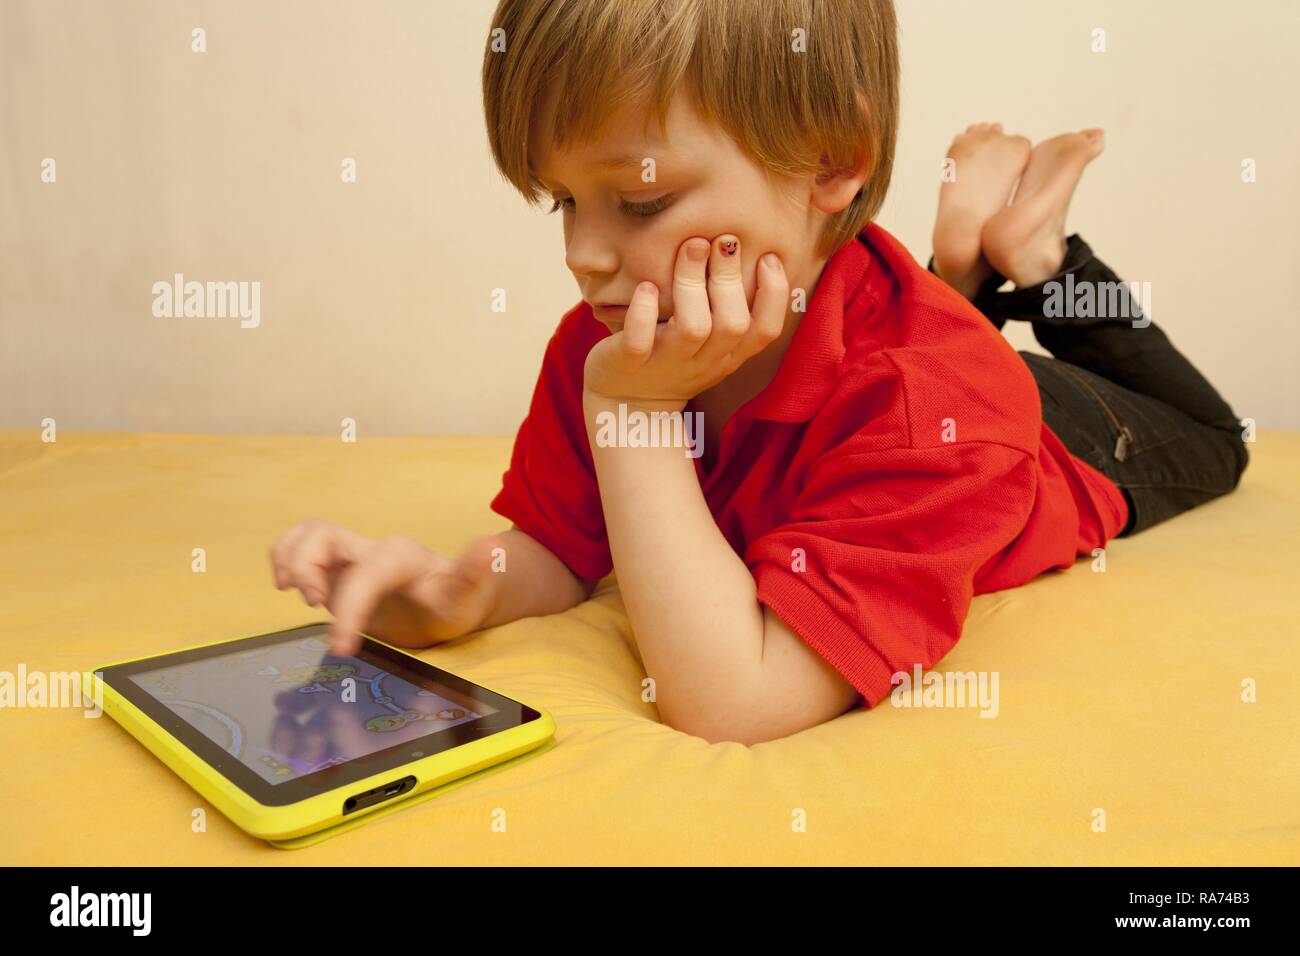 Boy playing with a tablet PC Stock Photo